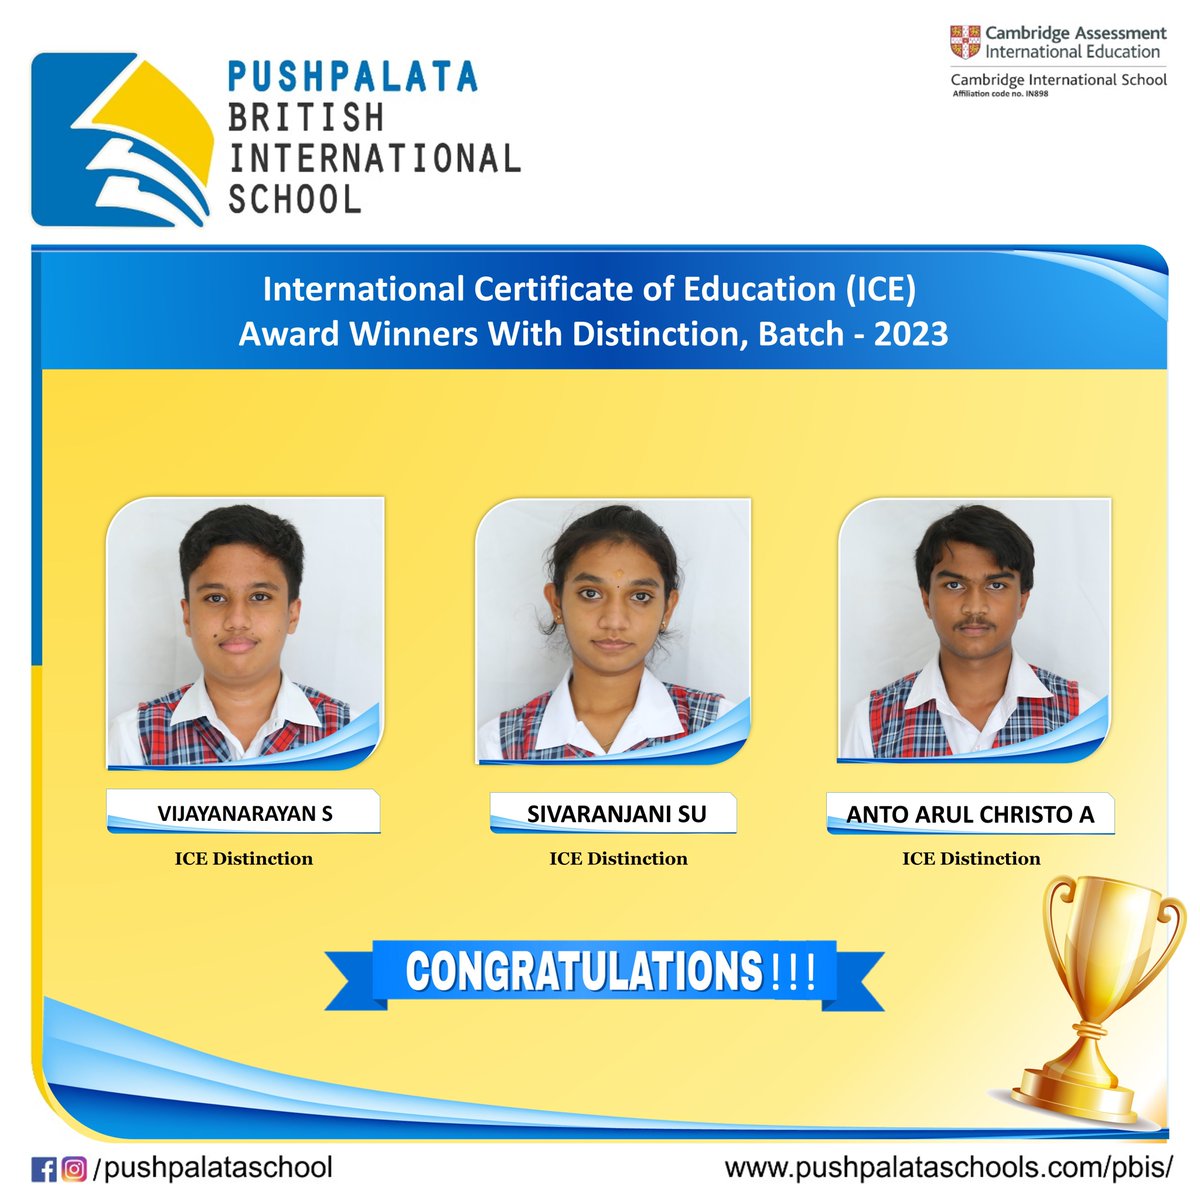 'Positive thinking and Action results in success'. PBIS congratulates the students who have attained ICE Distinction in the Cambridge IGCSE (Grade 10) November 2022 Examination.#PBIS #CambridgeResults #IGCSEResults #ICEResults #CambridgeSchools #PushpalataSchools